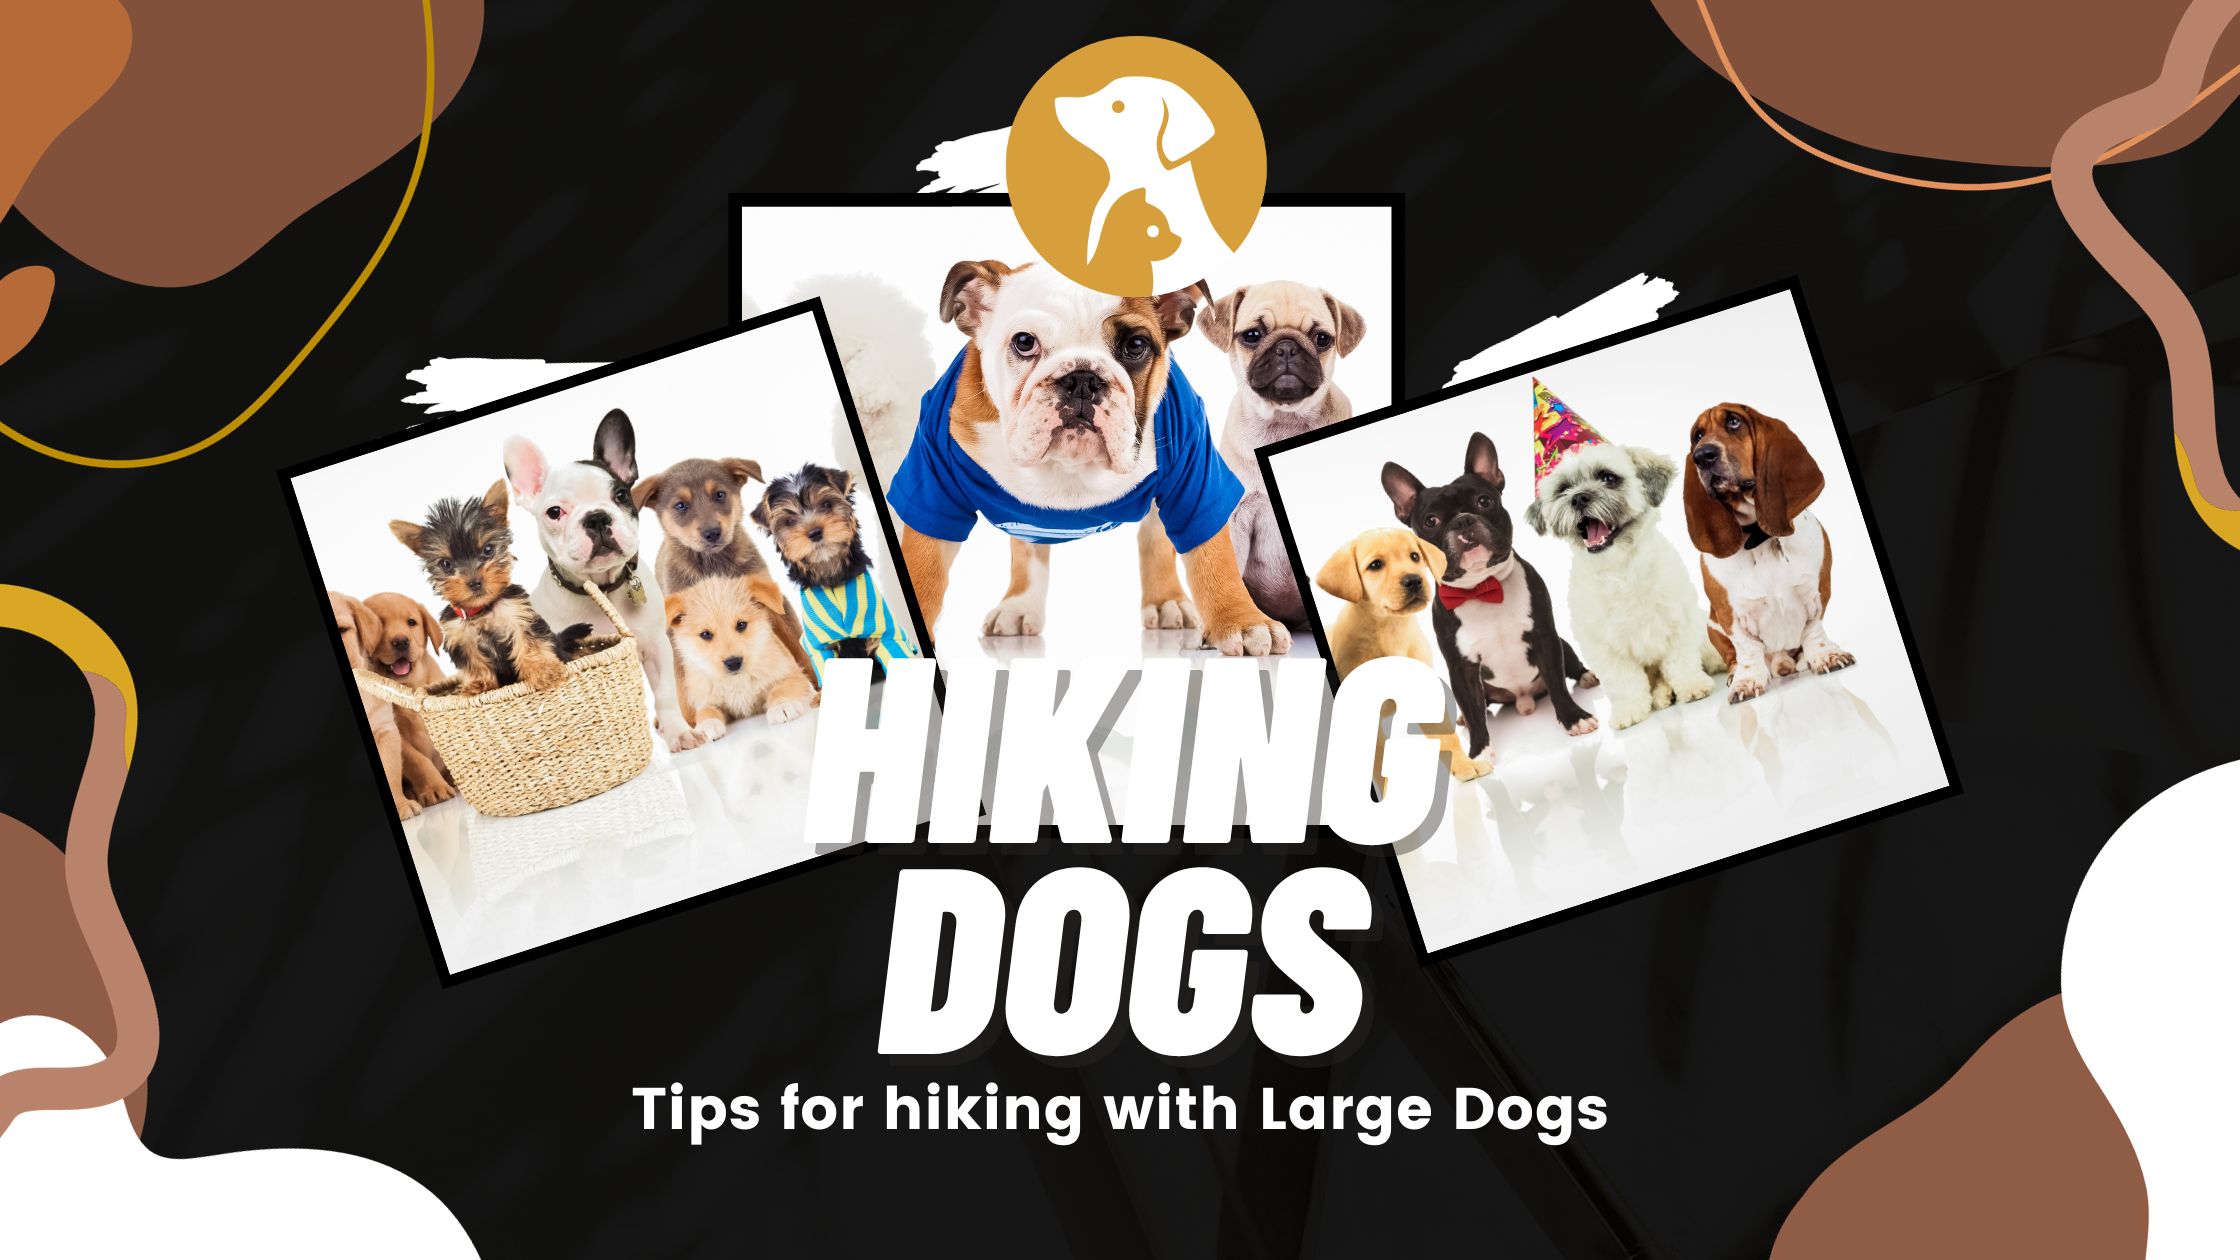 Tips for hiking with Large Dogs.jpg